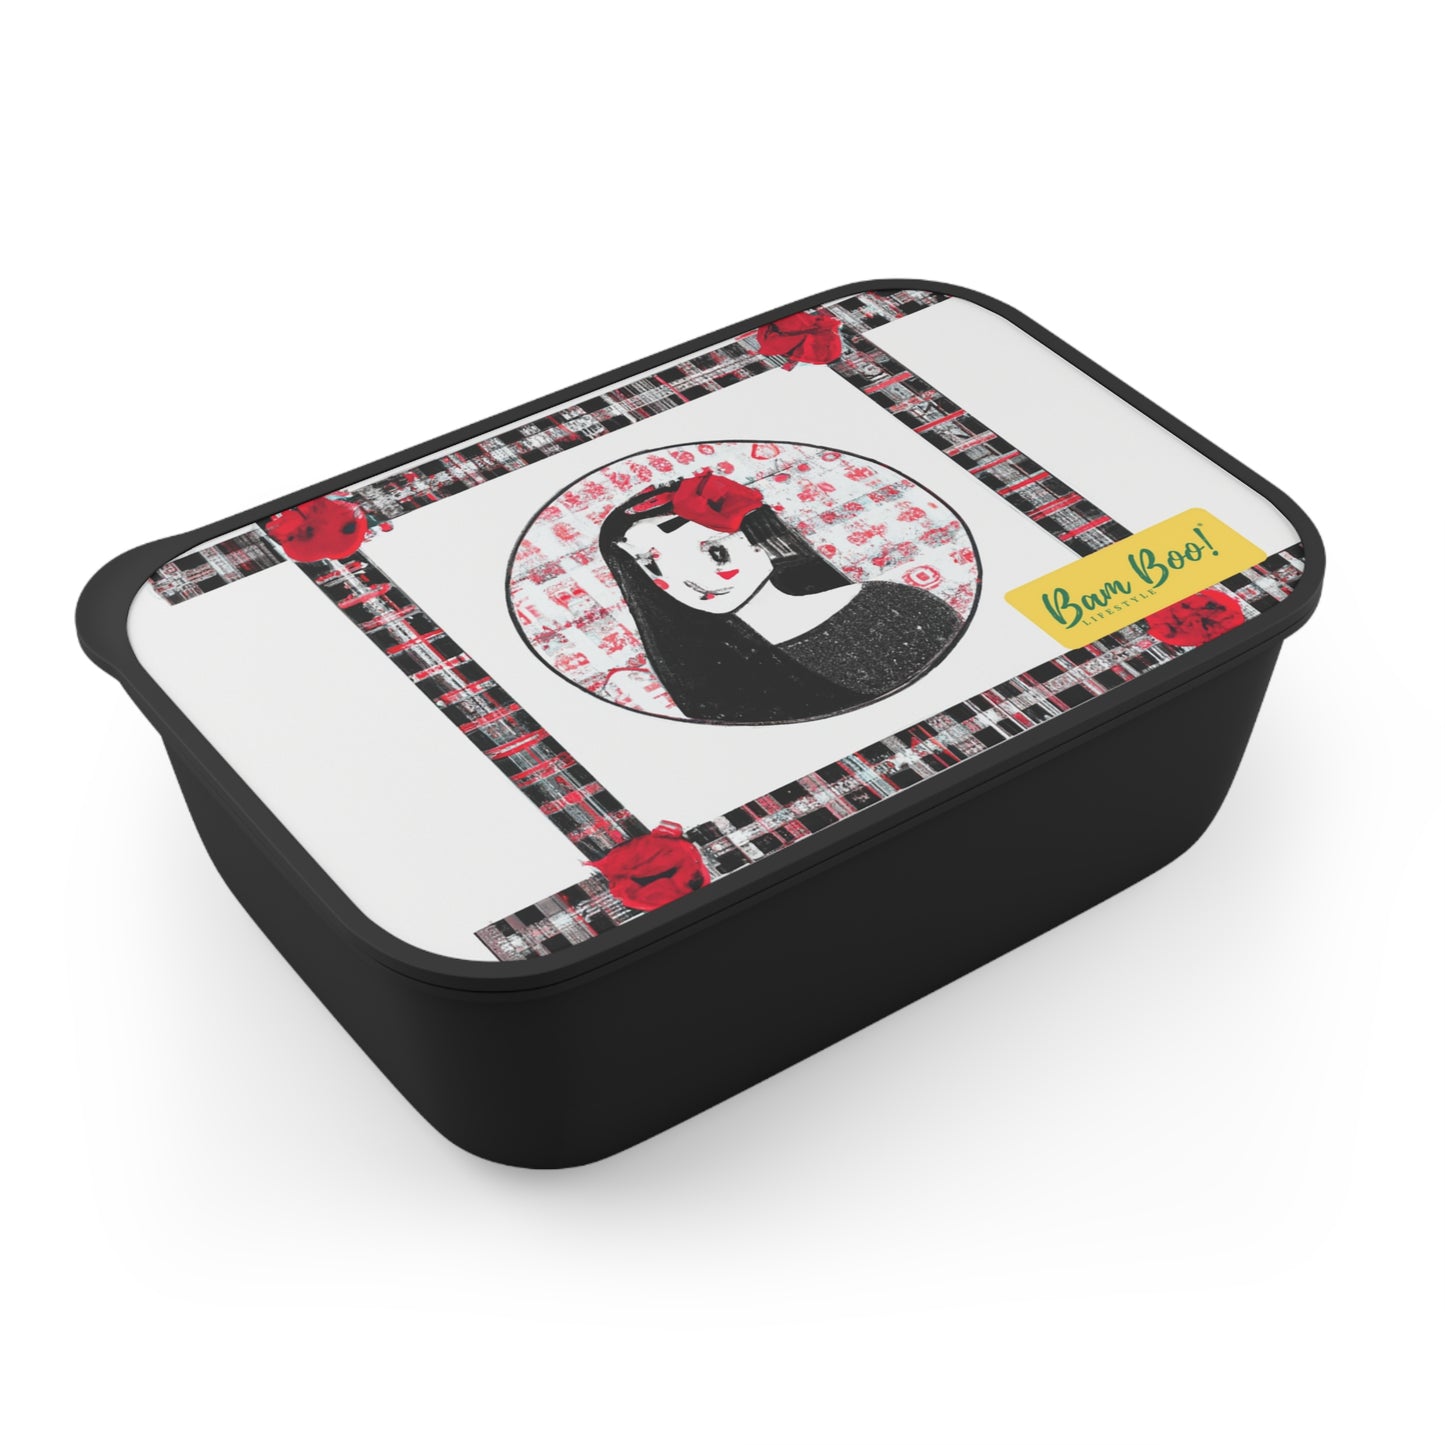 "Expressing Myself: A Self-Portrait of My Unique Identity" - Bam Boo! Lifestyle Eco-friendly PLA Bento Box with Band and Utensils